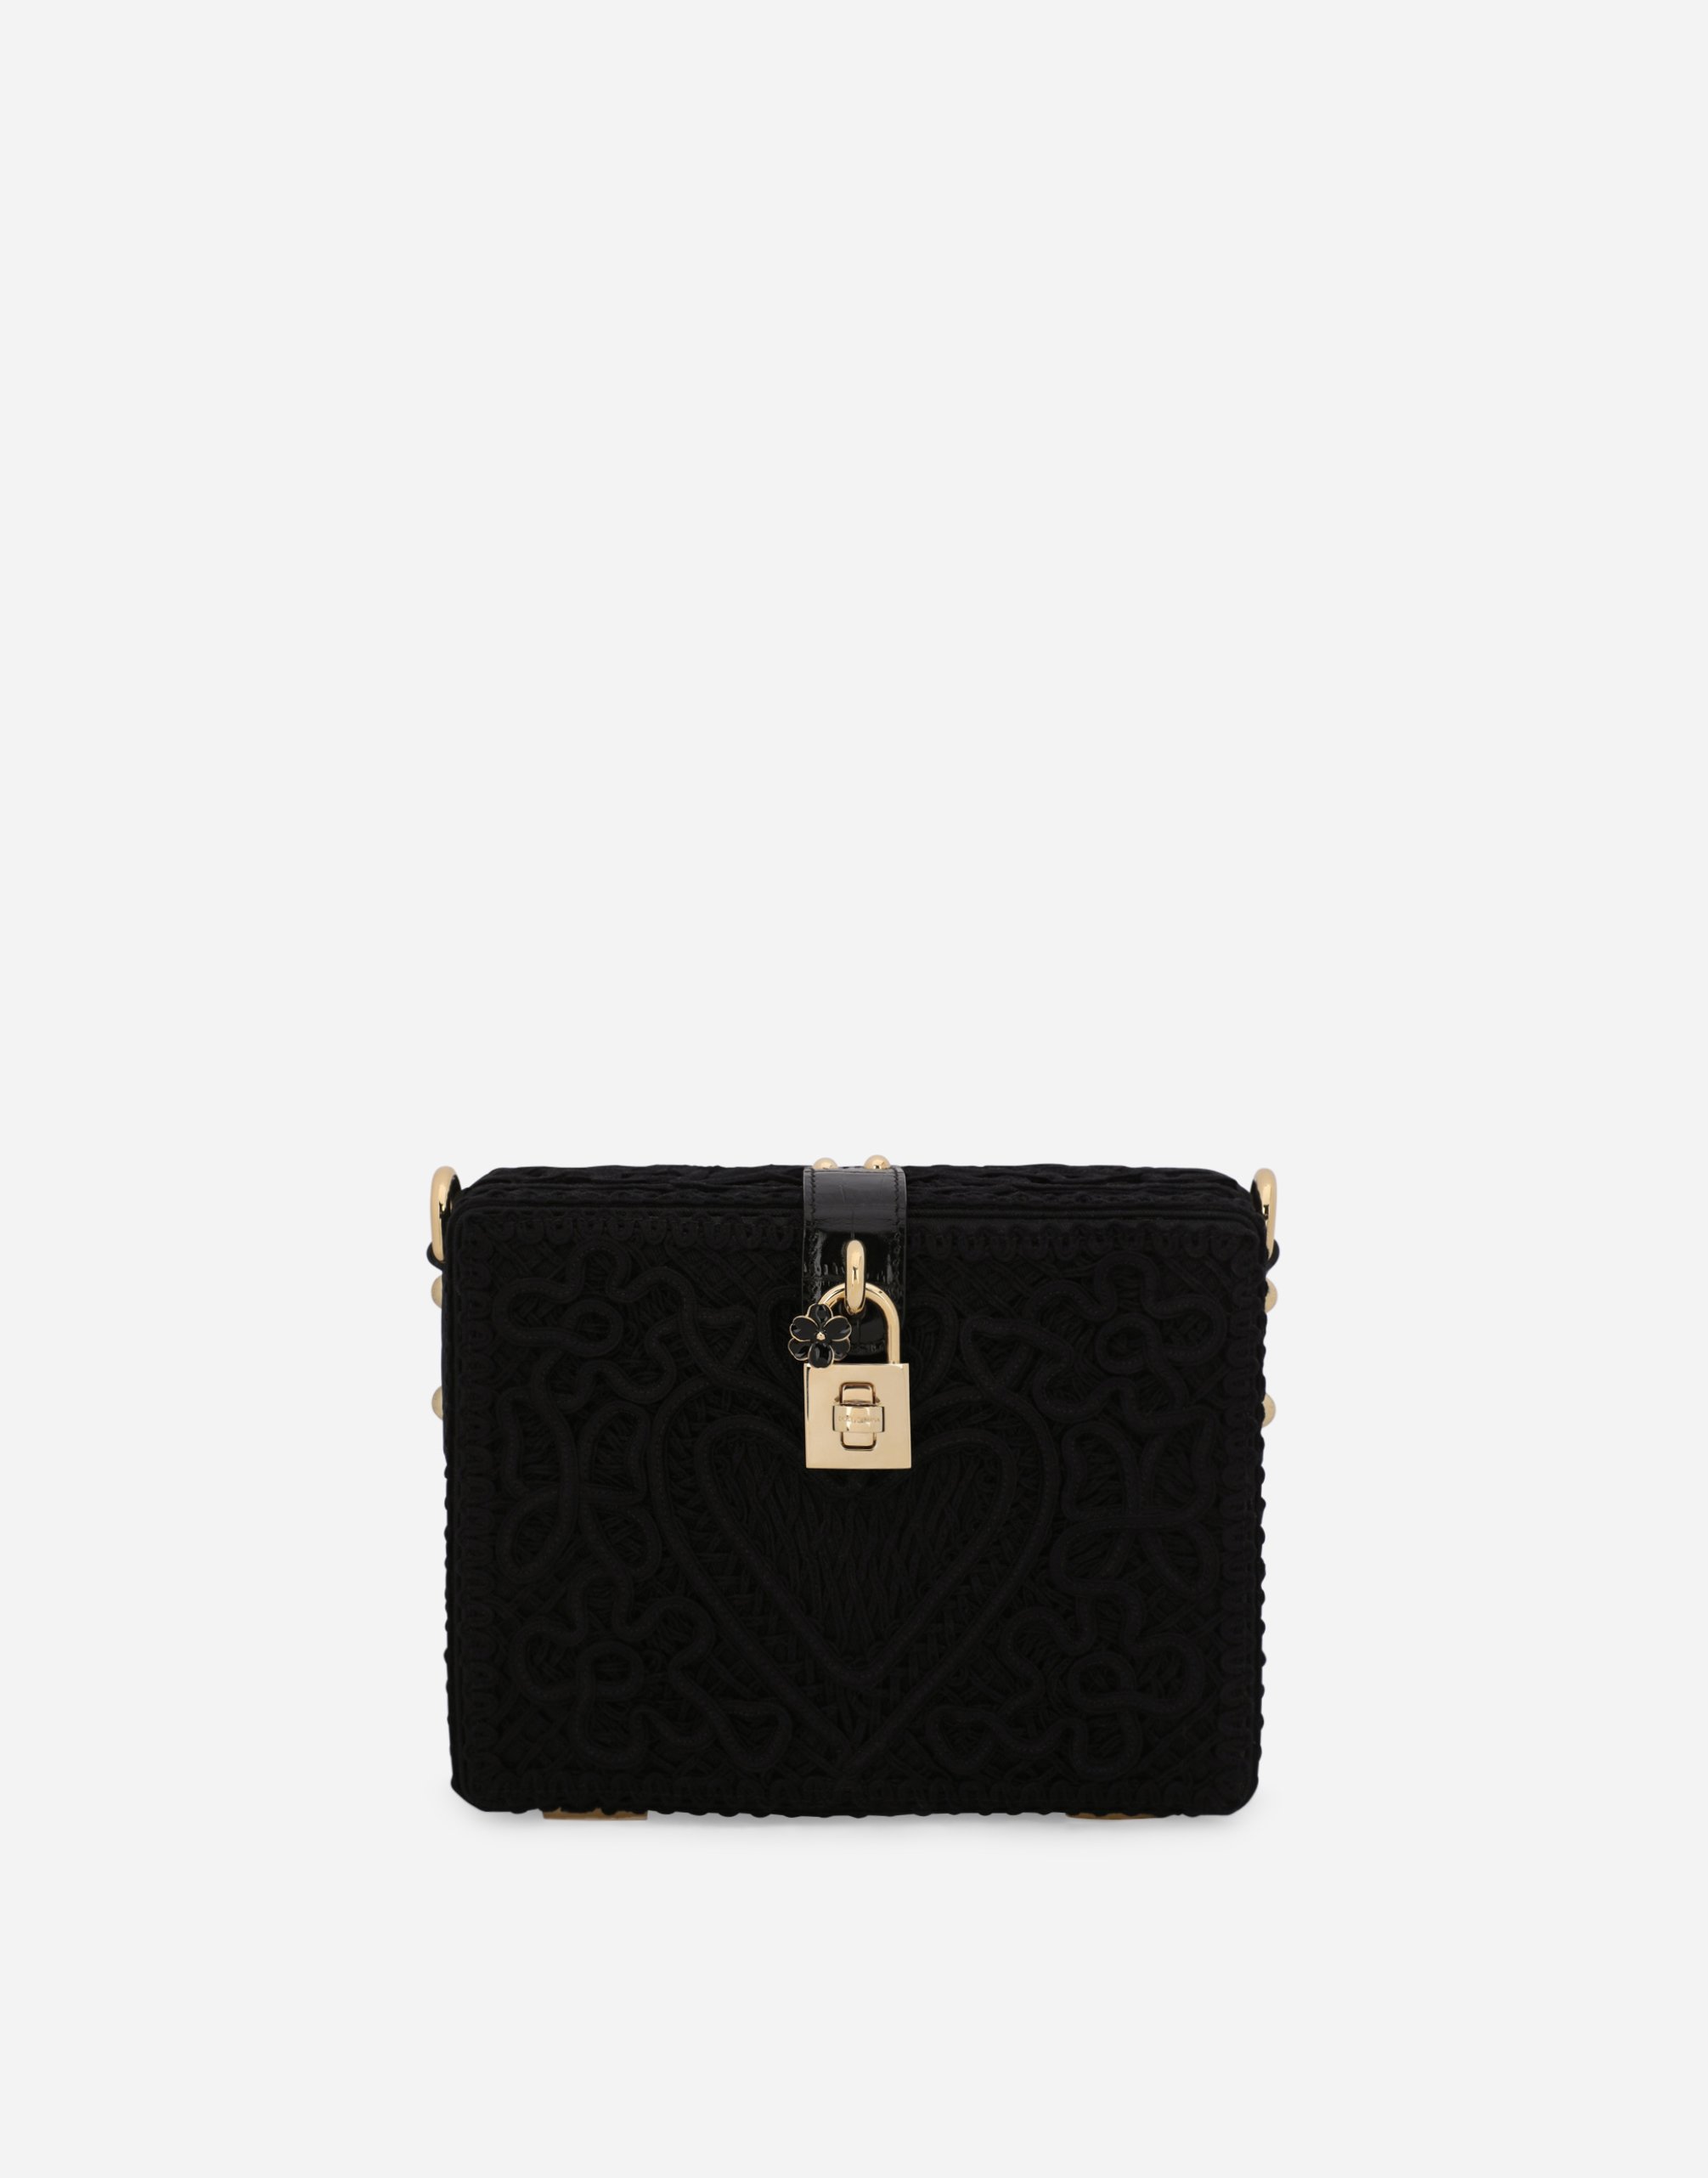 Dolce & Gabbana Dolce Box Bag With Cordonetto Detailing In Black